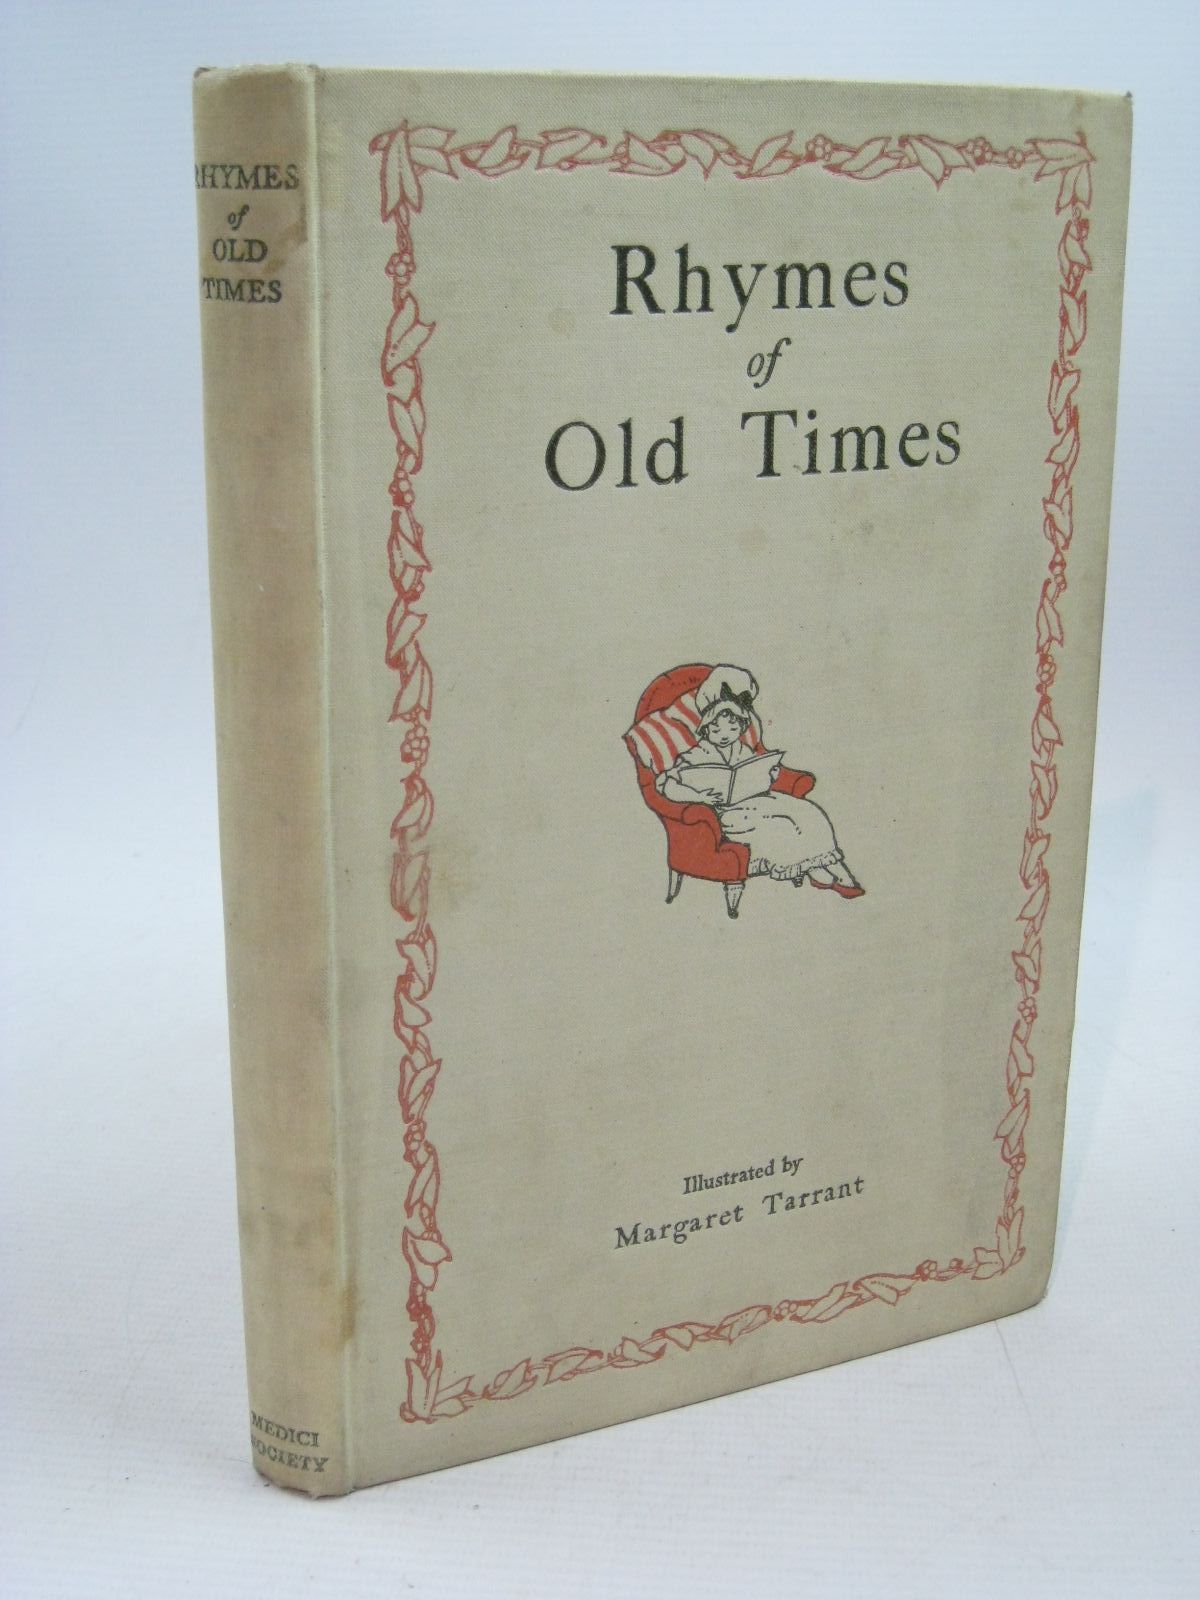 ILLUSTRATED BY TARRANT, MARGARET - Rhymes of Old Times